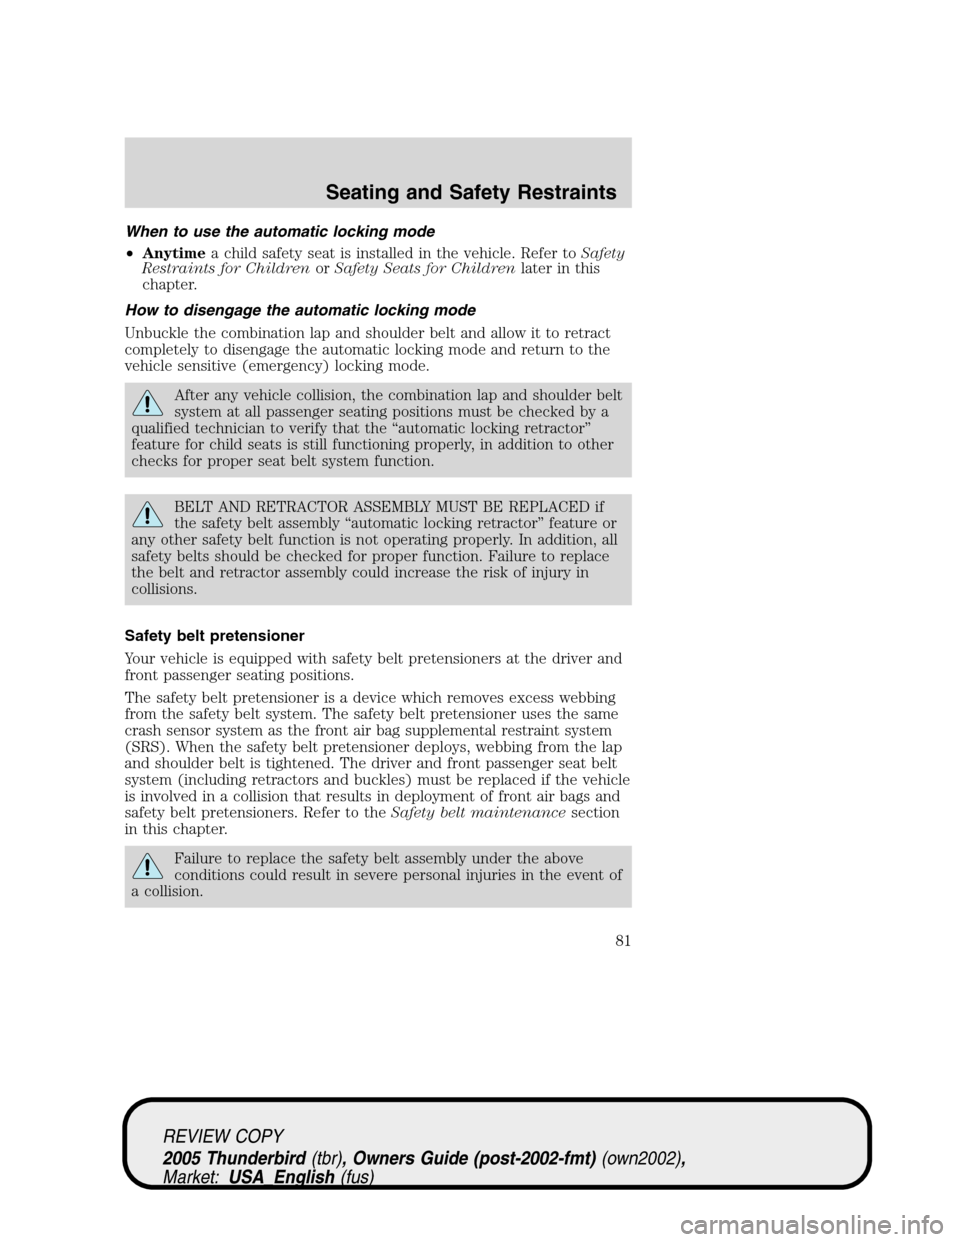 FORD THUNDERBIRD 2005 11.G Owners Manual When to use the automatic locking mode
•Anytimea child safety seat is installed in the vehicle. Refer toSafety
Restraints for ChildrenorSafety Seats for Childrenlater in this
chapter.
How to disenga